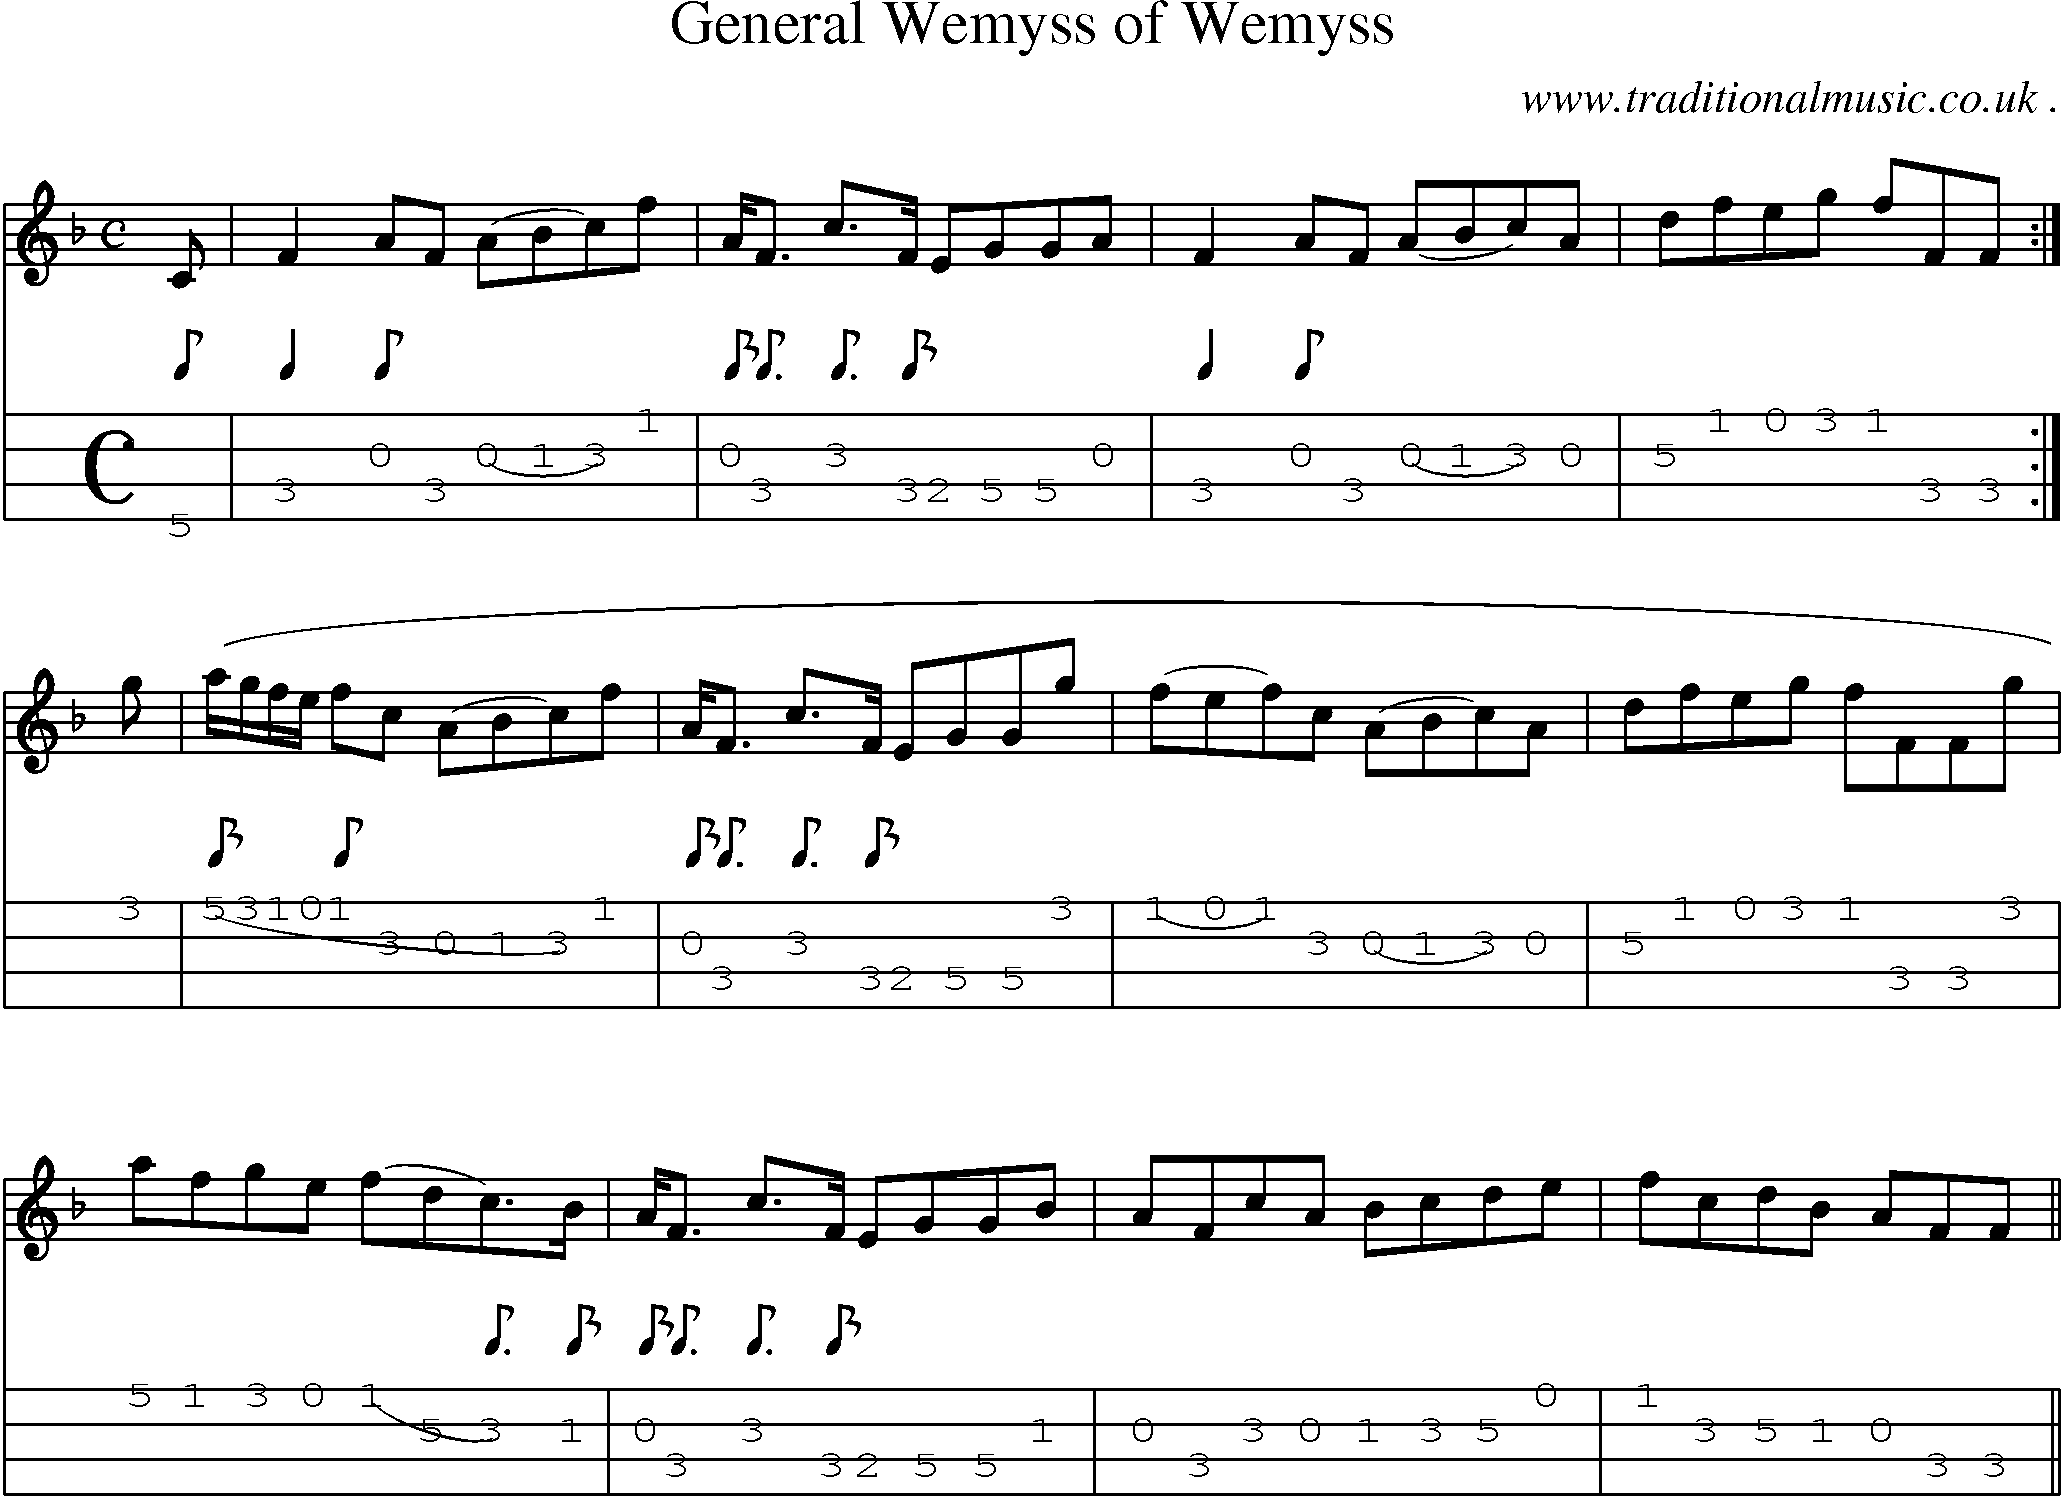 Sheet-music  score, Chords and Mandolin Tabs for General Wemyss Of Wemyss